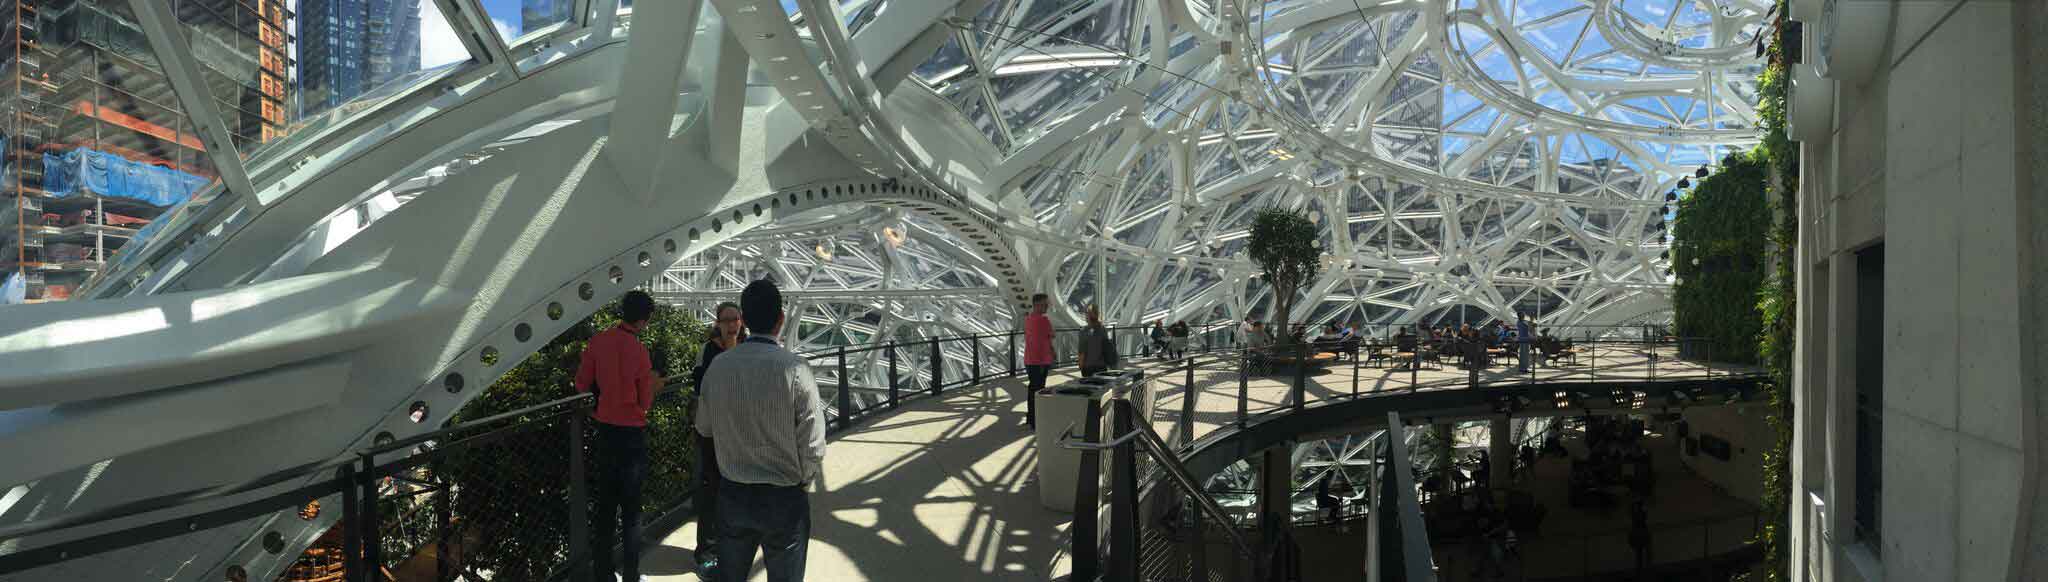 The walkway under the highest part of the dome puts you right next to the glass panels.